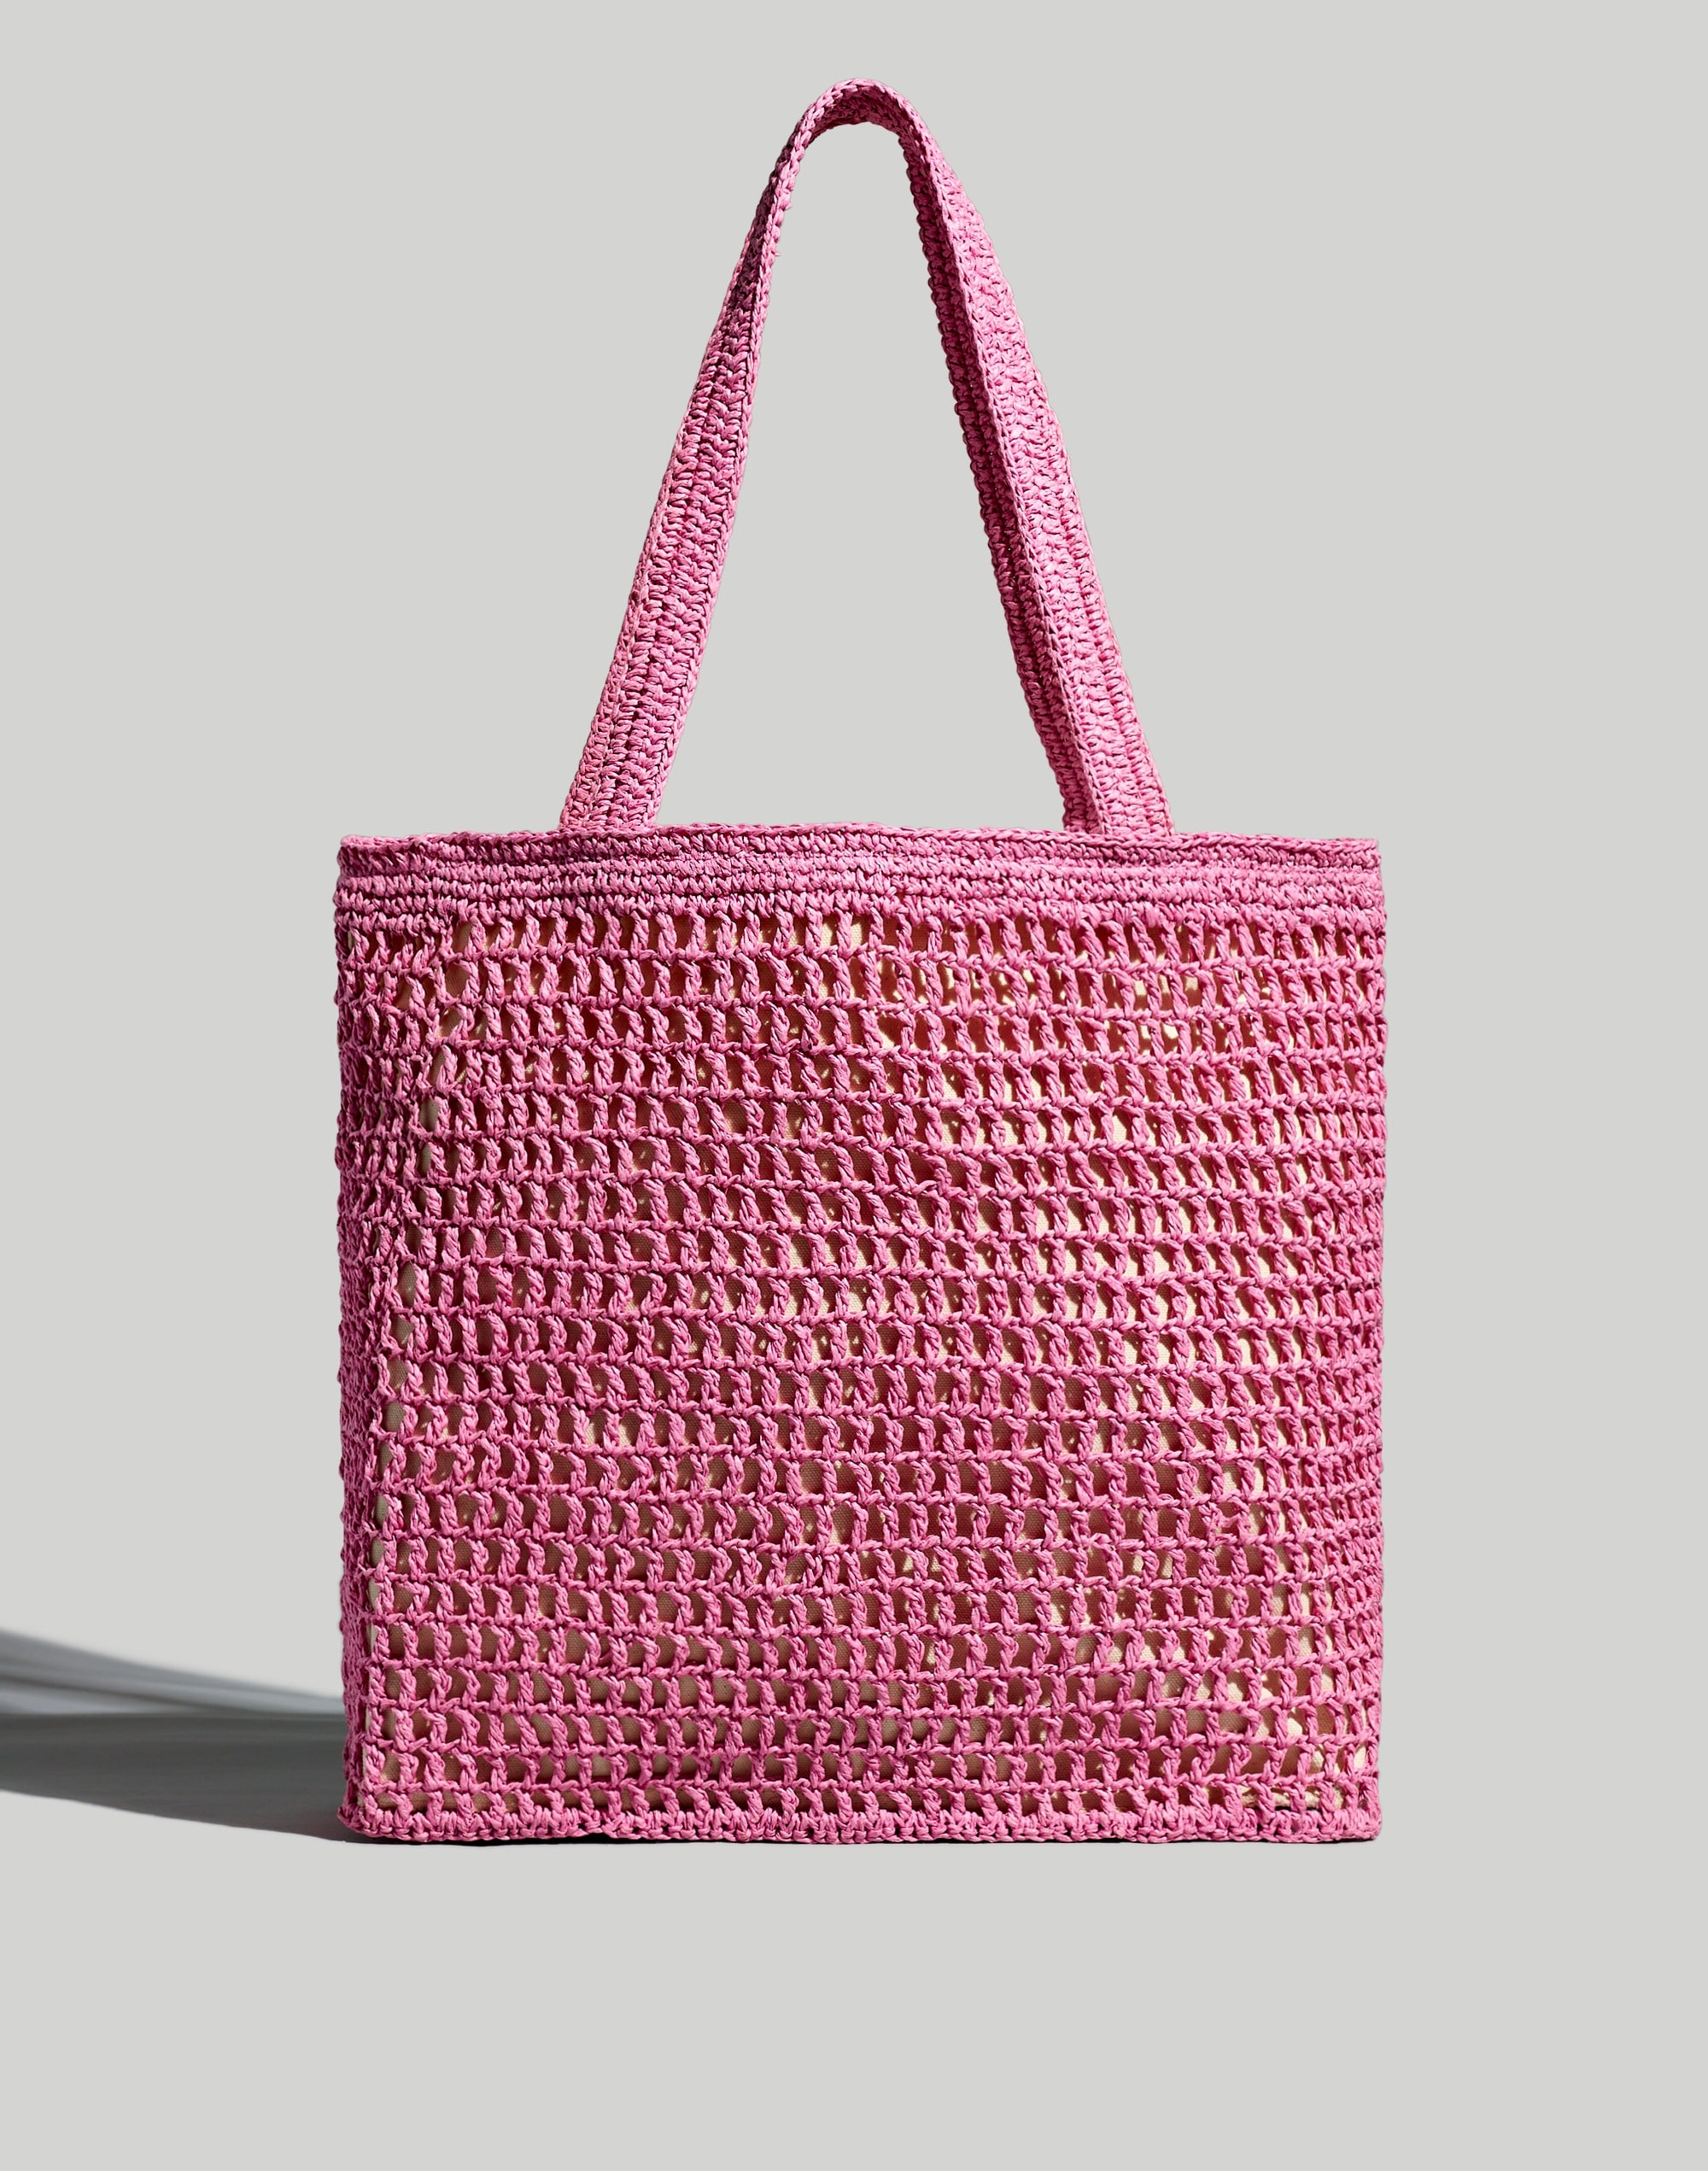 Mw The Transport Tote: Straw Edition In Retro Pink